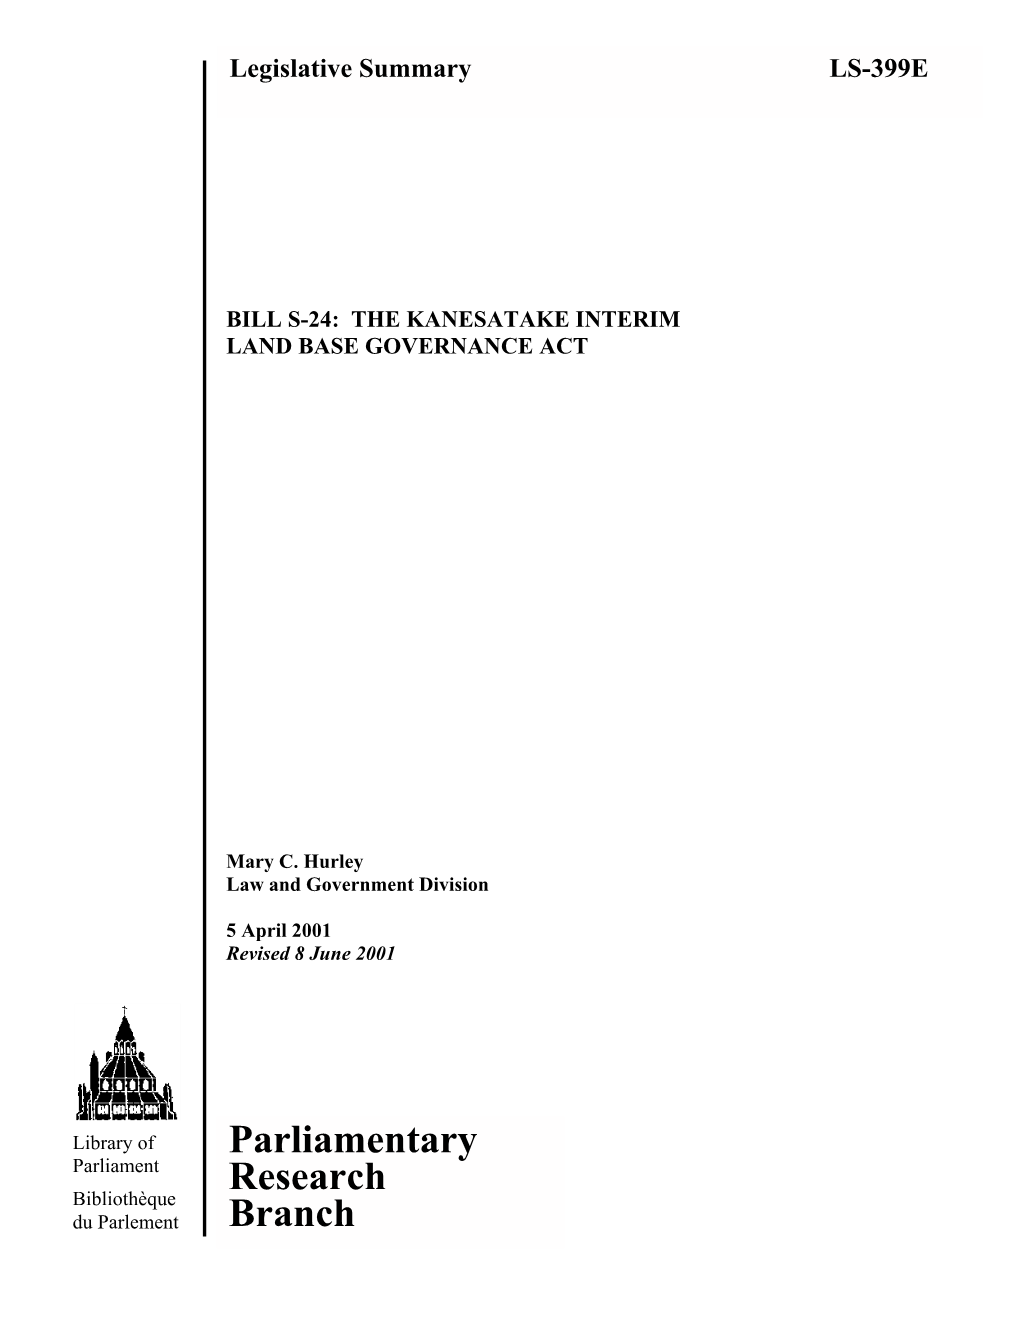 Parliamentary Research Branch, Library of Parliament